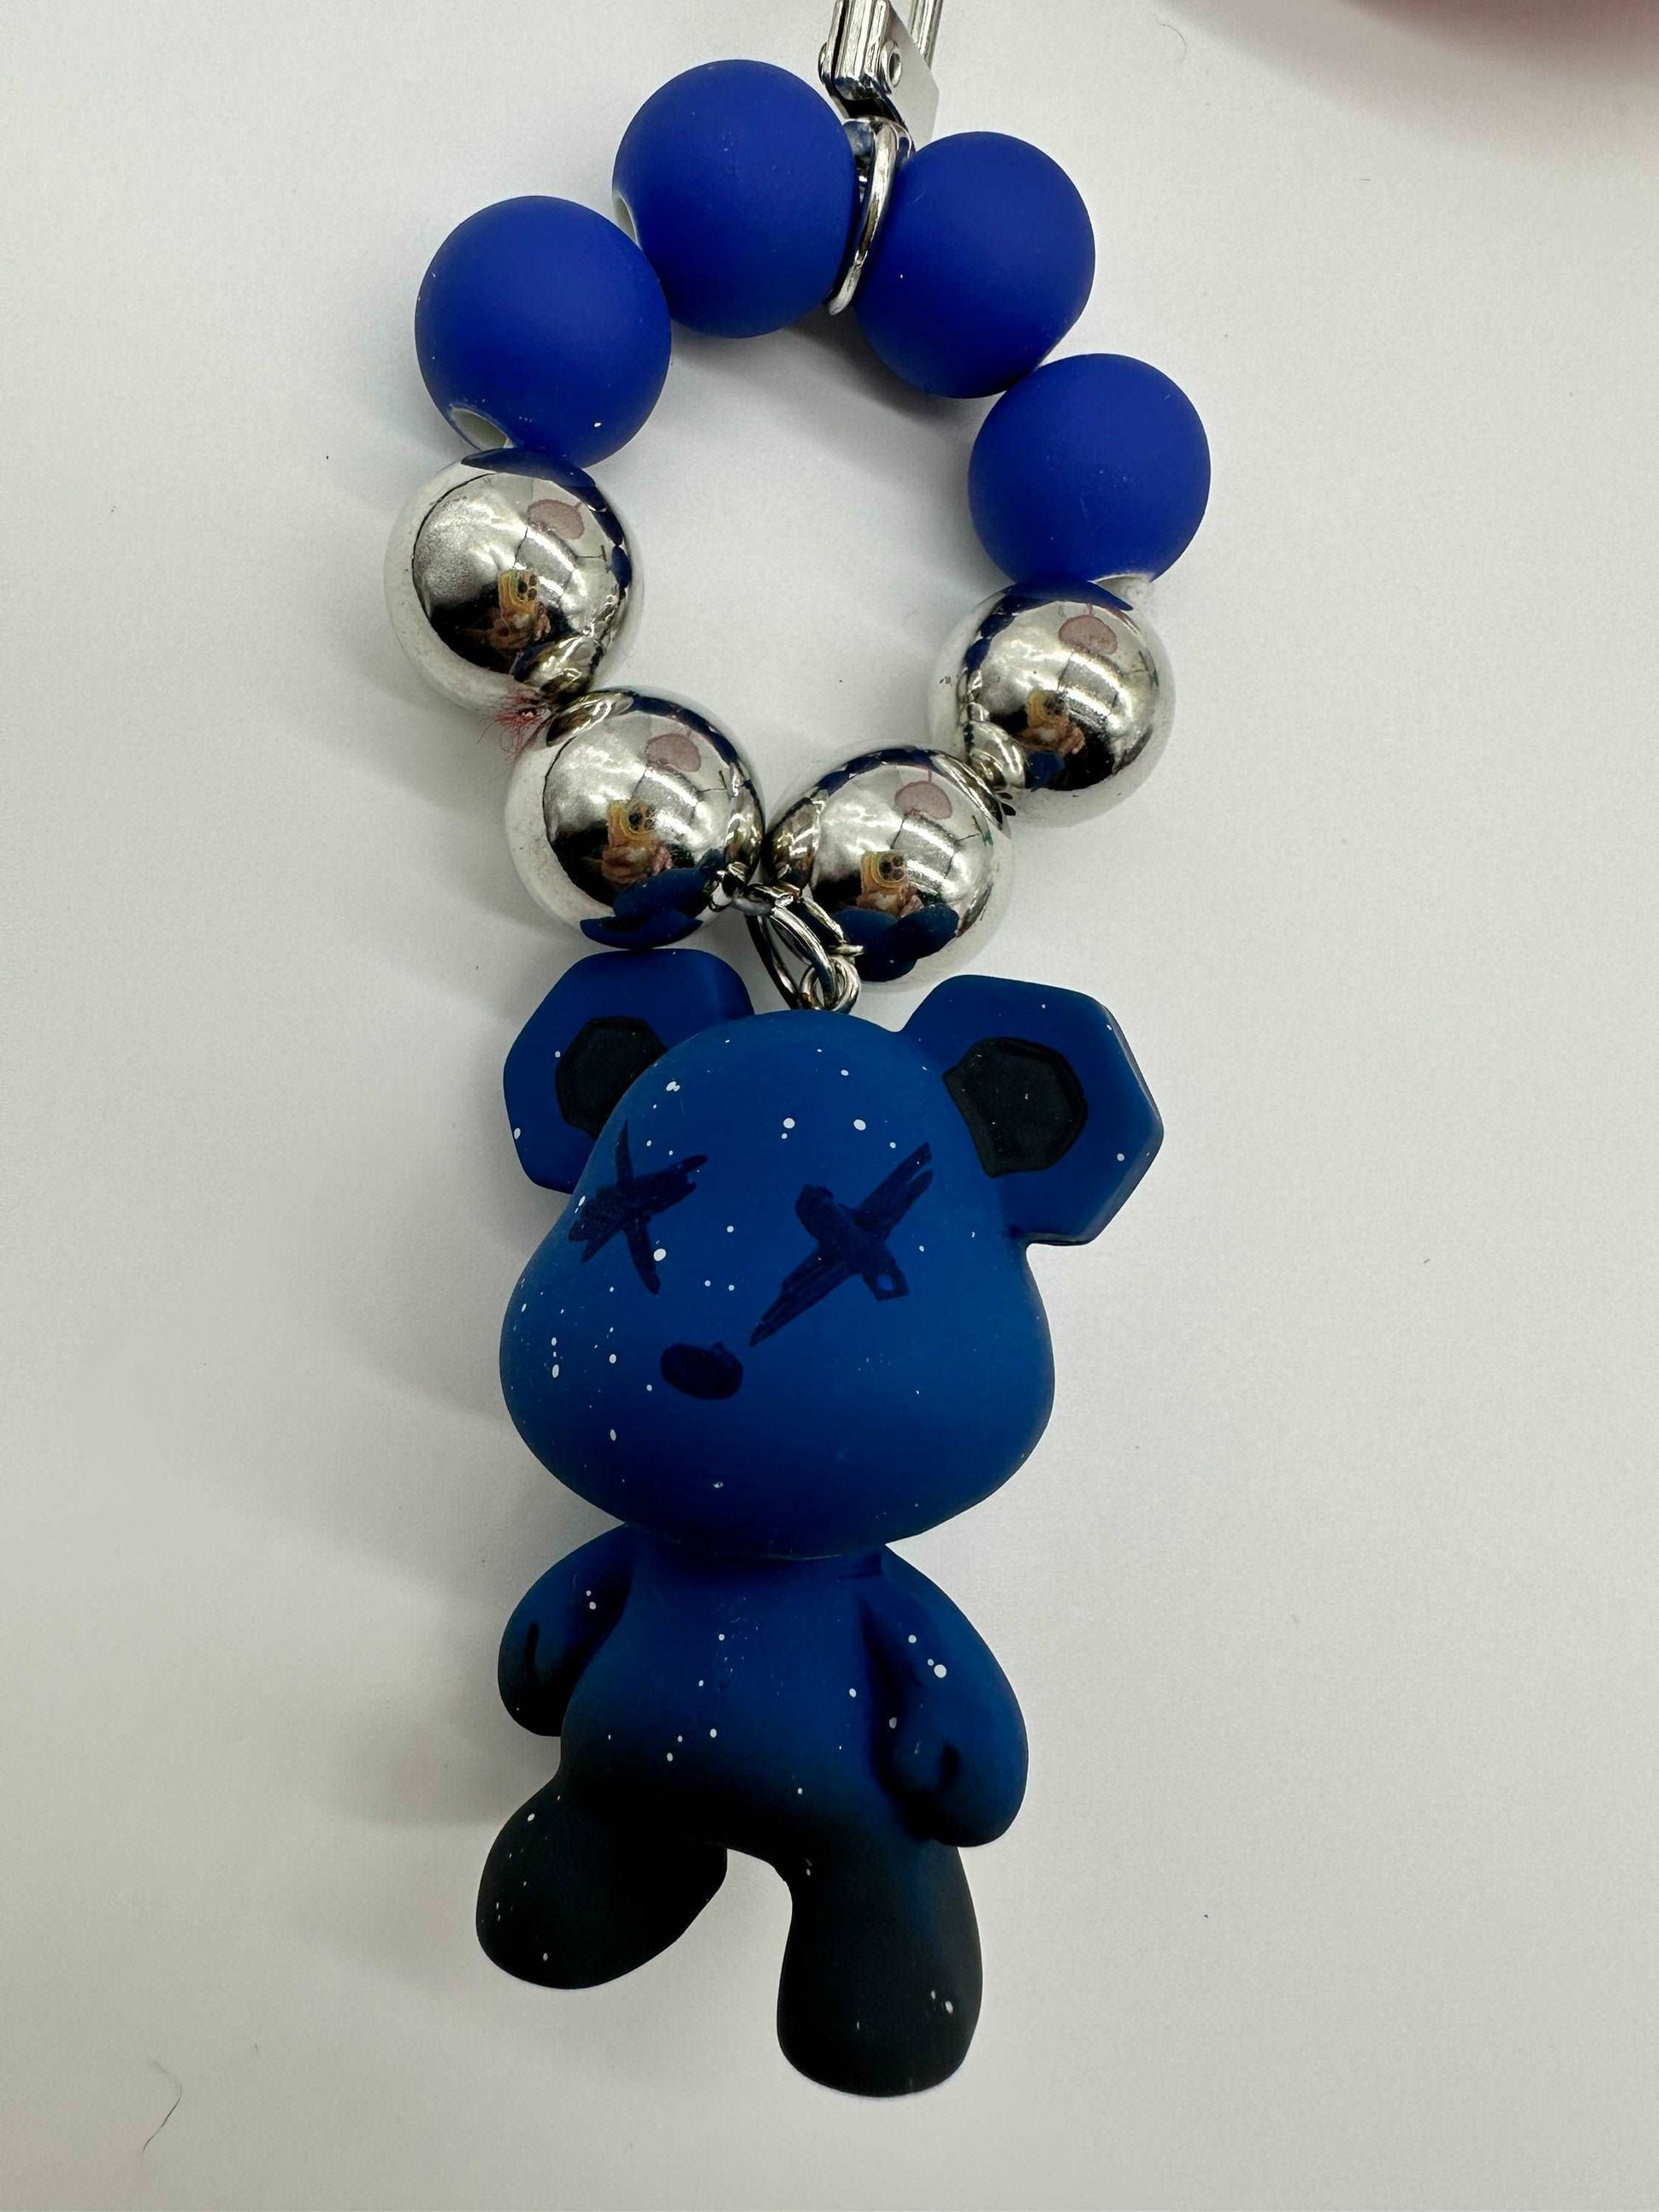 Beaded keychain, gifts for daughter, gift for a girlfriend, purse, charm, phone, charm, laser bear keychain